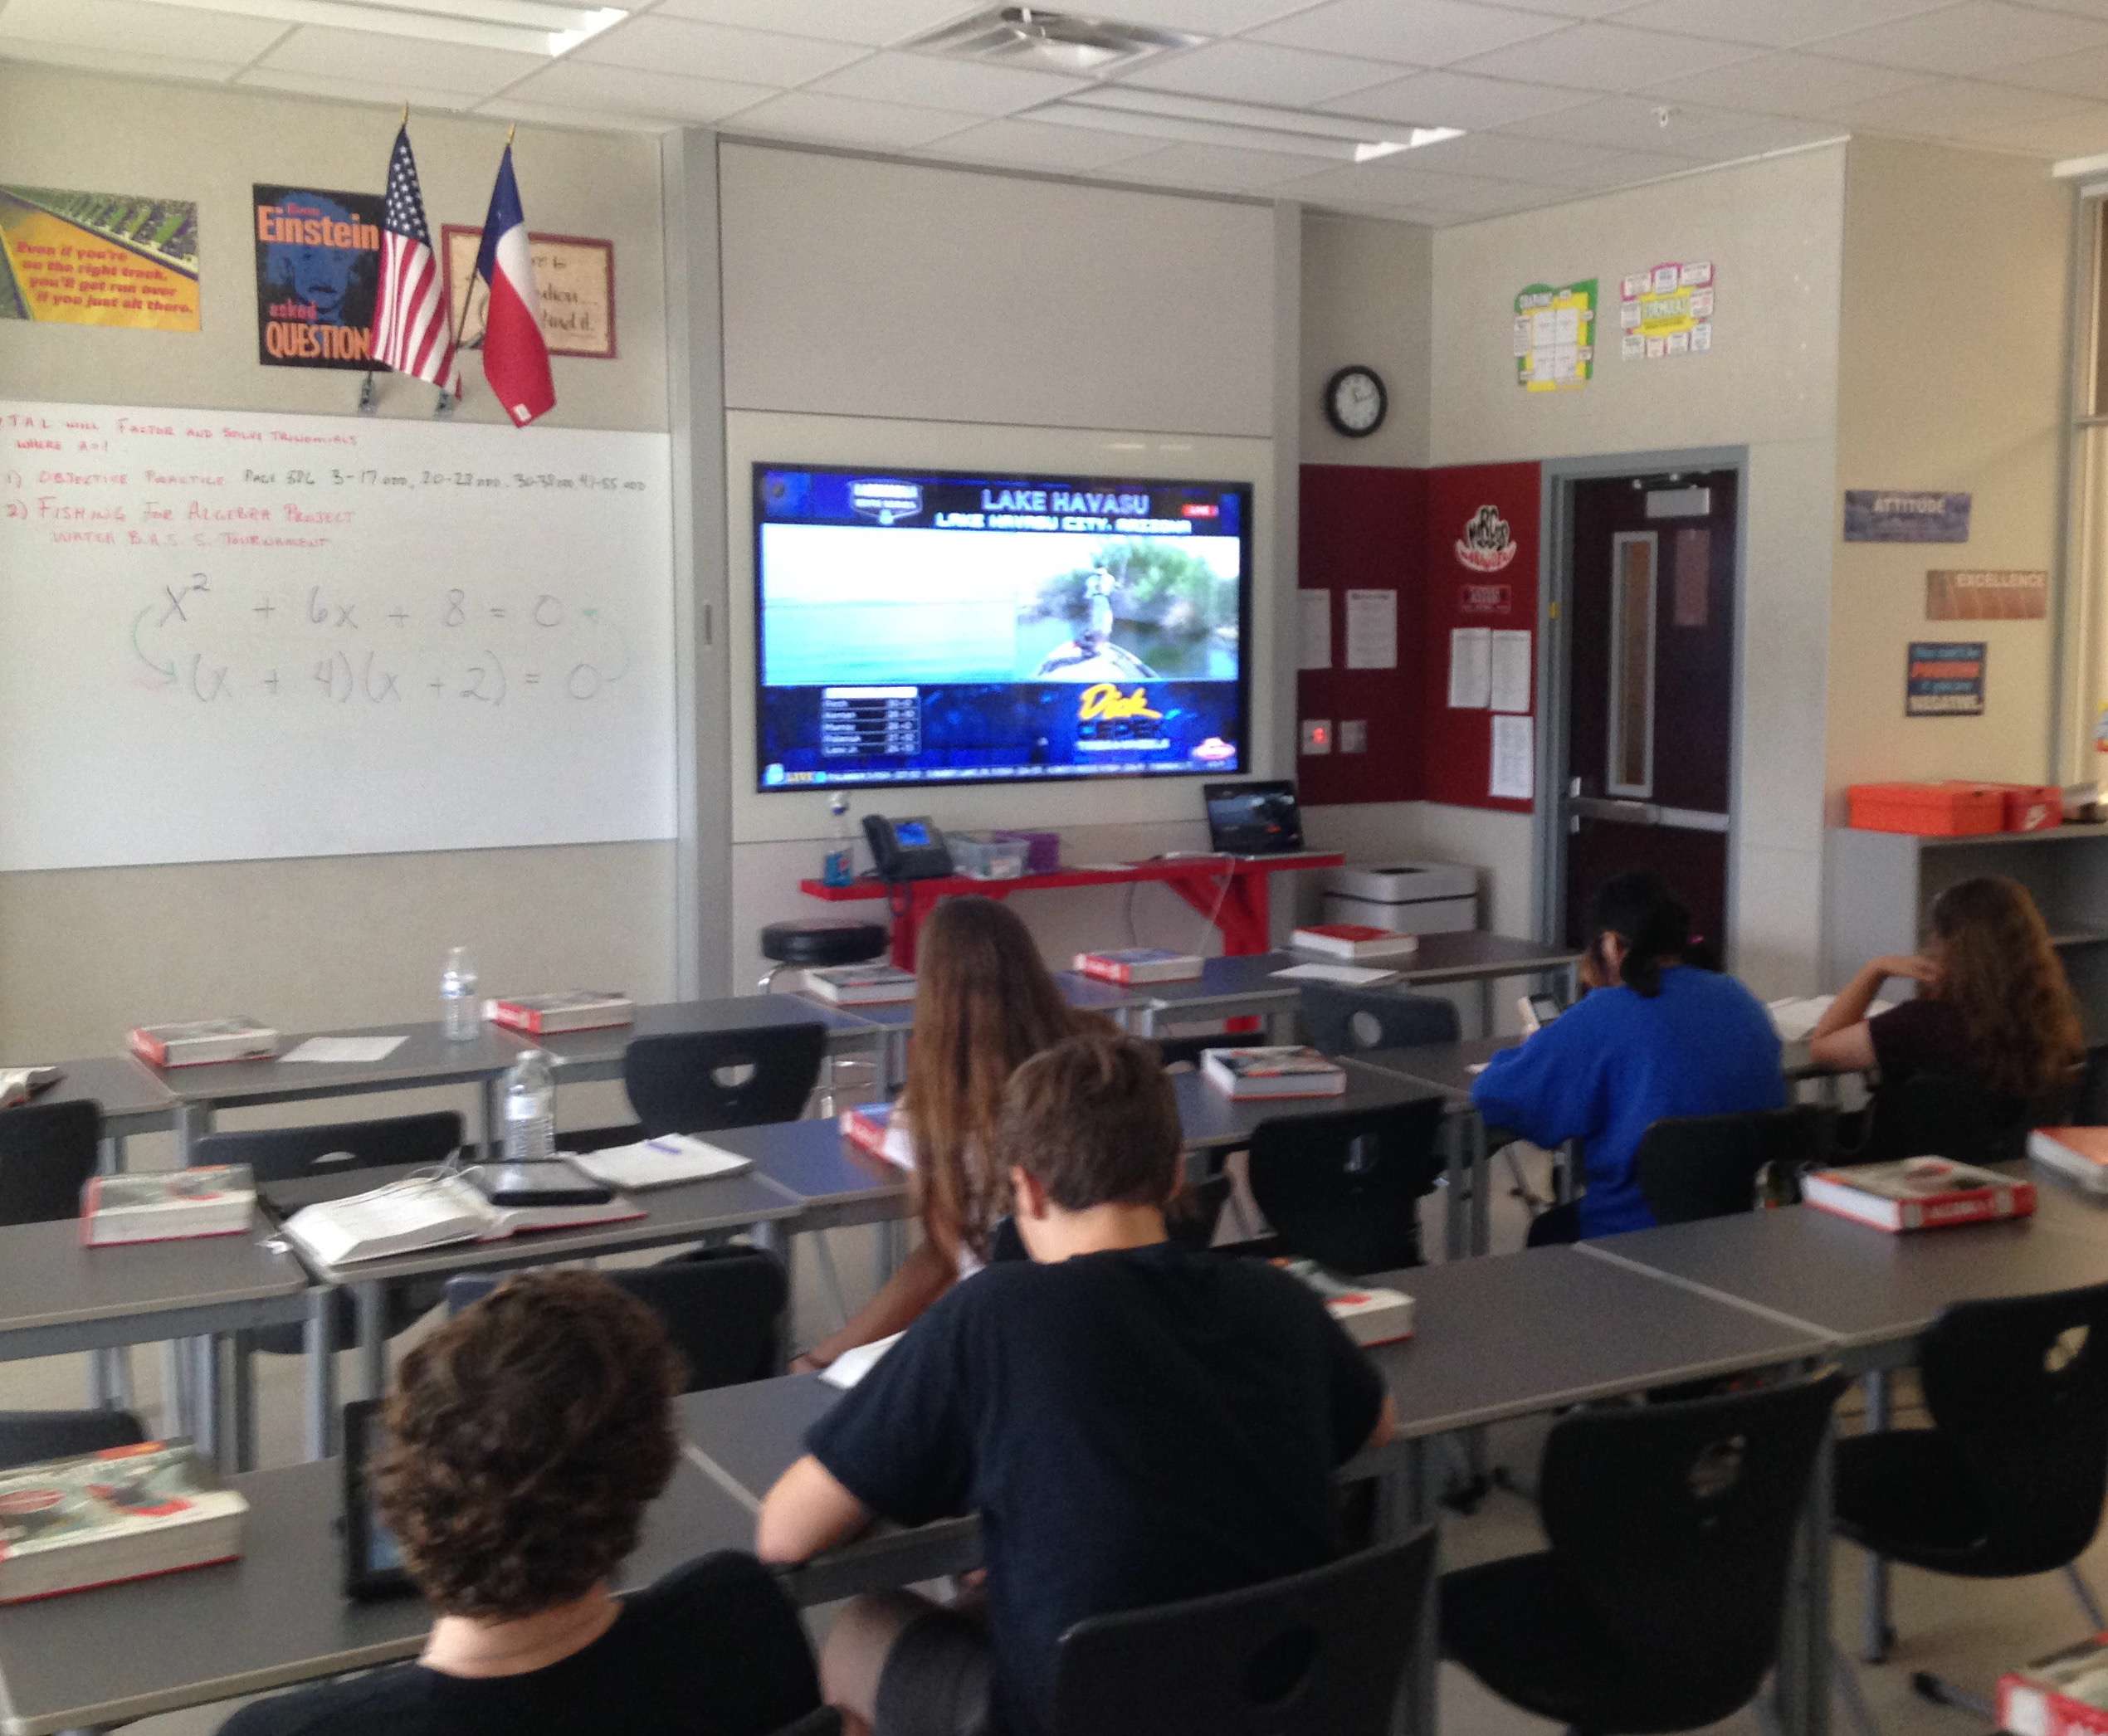 Schwolert has also let his class watch Bassmaster LIVE during an Elite Series event, which he considered âa great opportunityâ to connect his students with their lessons on slope and rate of change with how the pros apply different reel speeds for their various techniques.